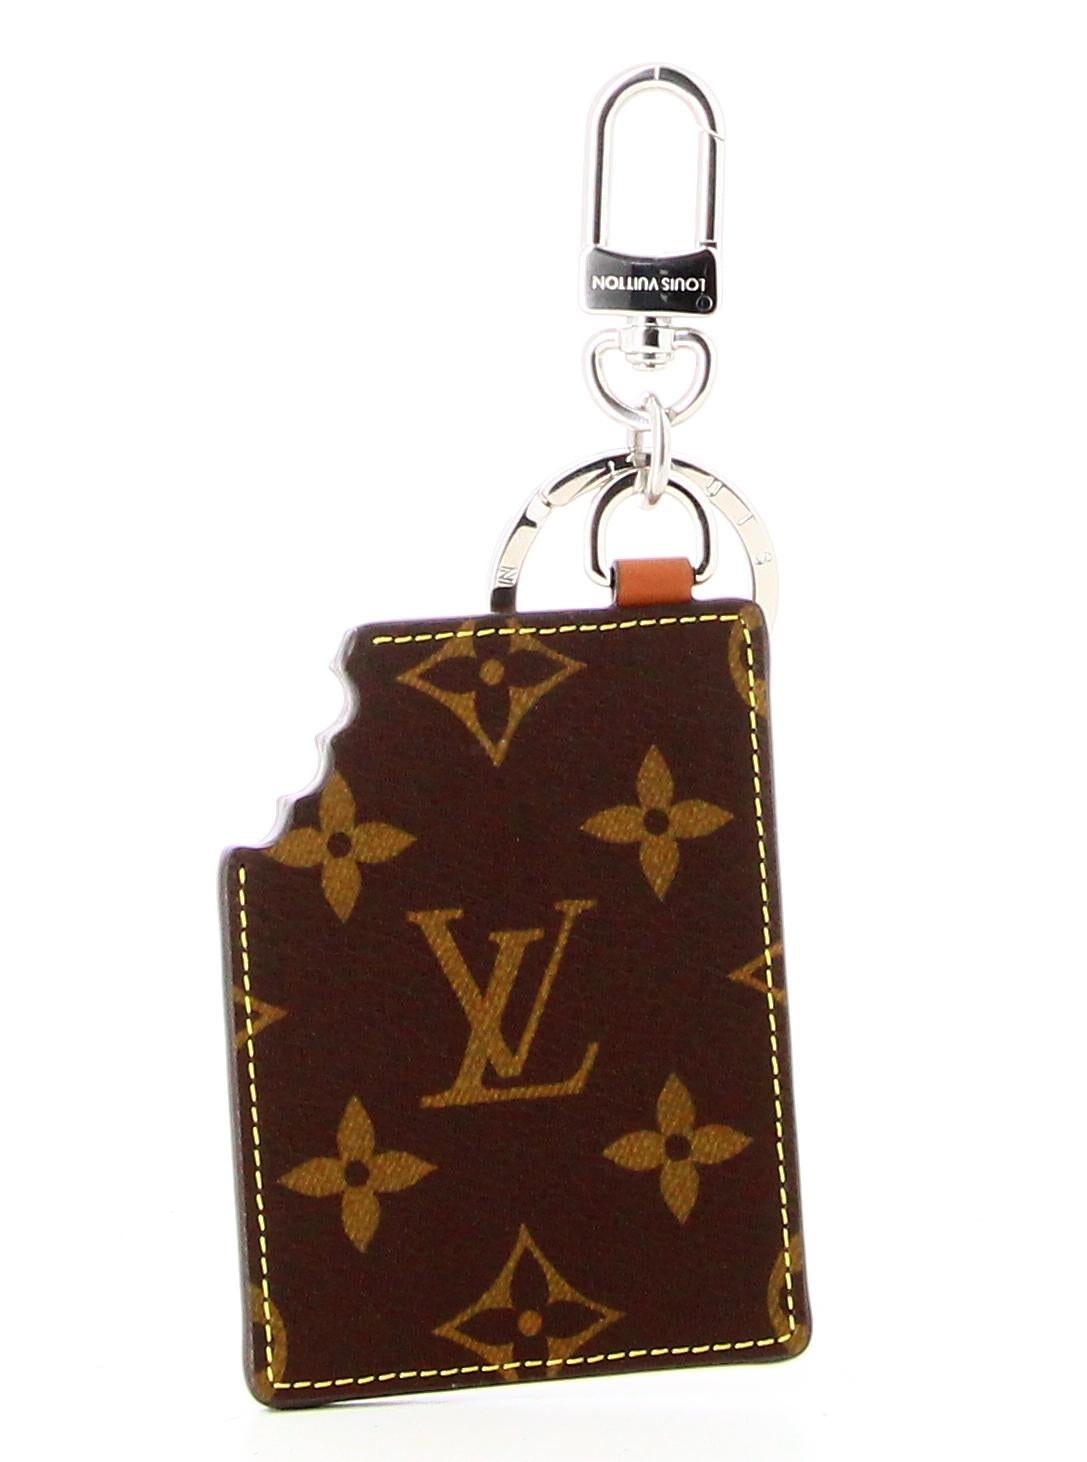 Louis Vuitton Monogram Chocolate Bar Key Ring 

- Very good condition. No signs of wear.
- Louis Vuitton key ring 
- Shape : Chocolate bar 
- Two sides 
- Silver buckle